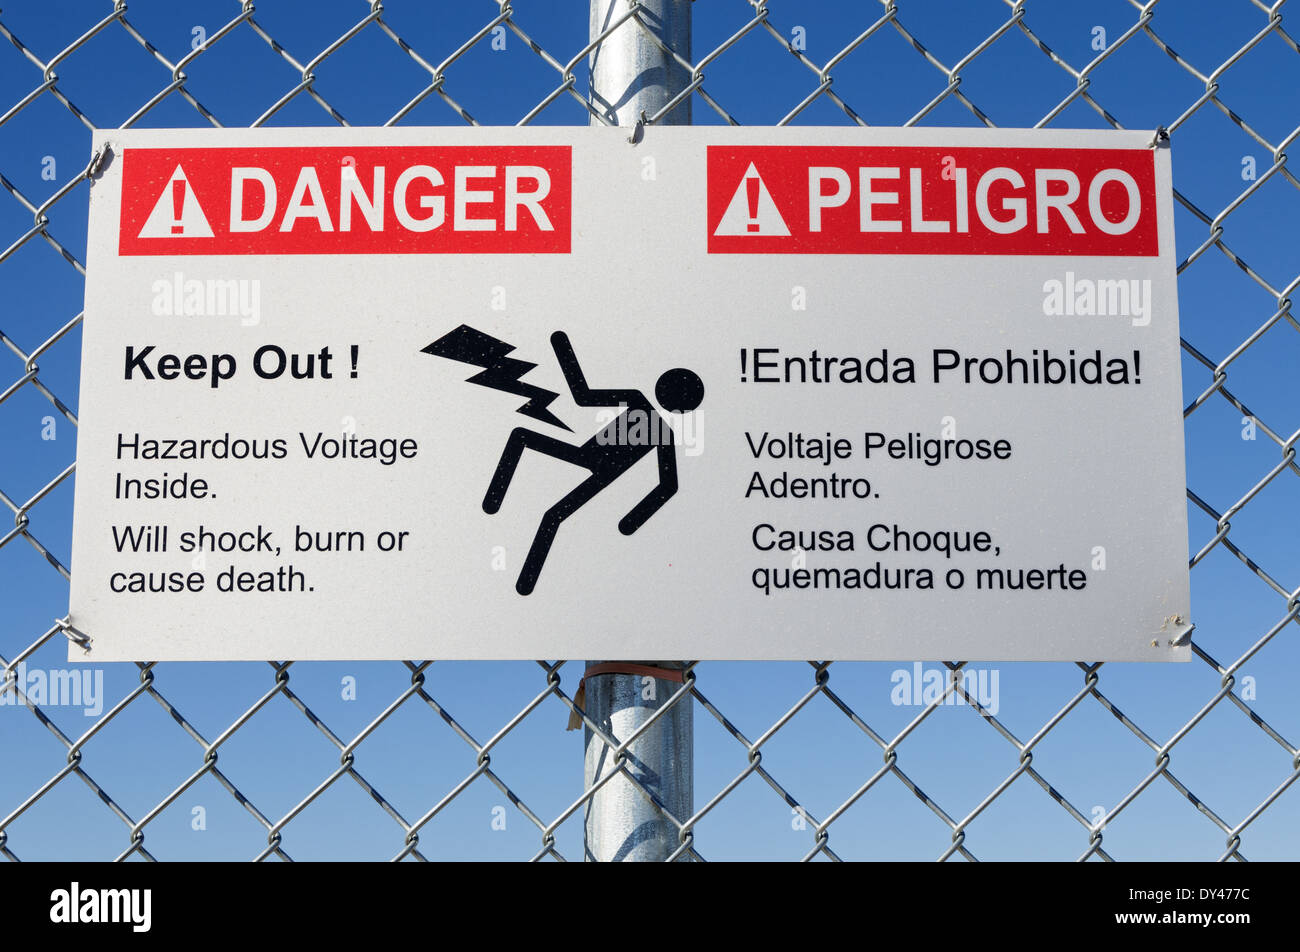 danger hazardous voltage keep out sign in English and Spanish on a fence with blue sky Stock Photo